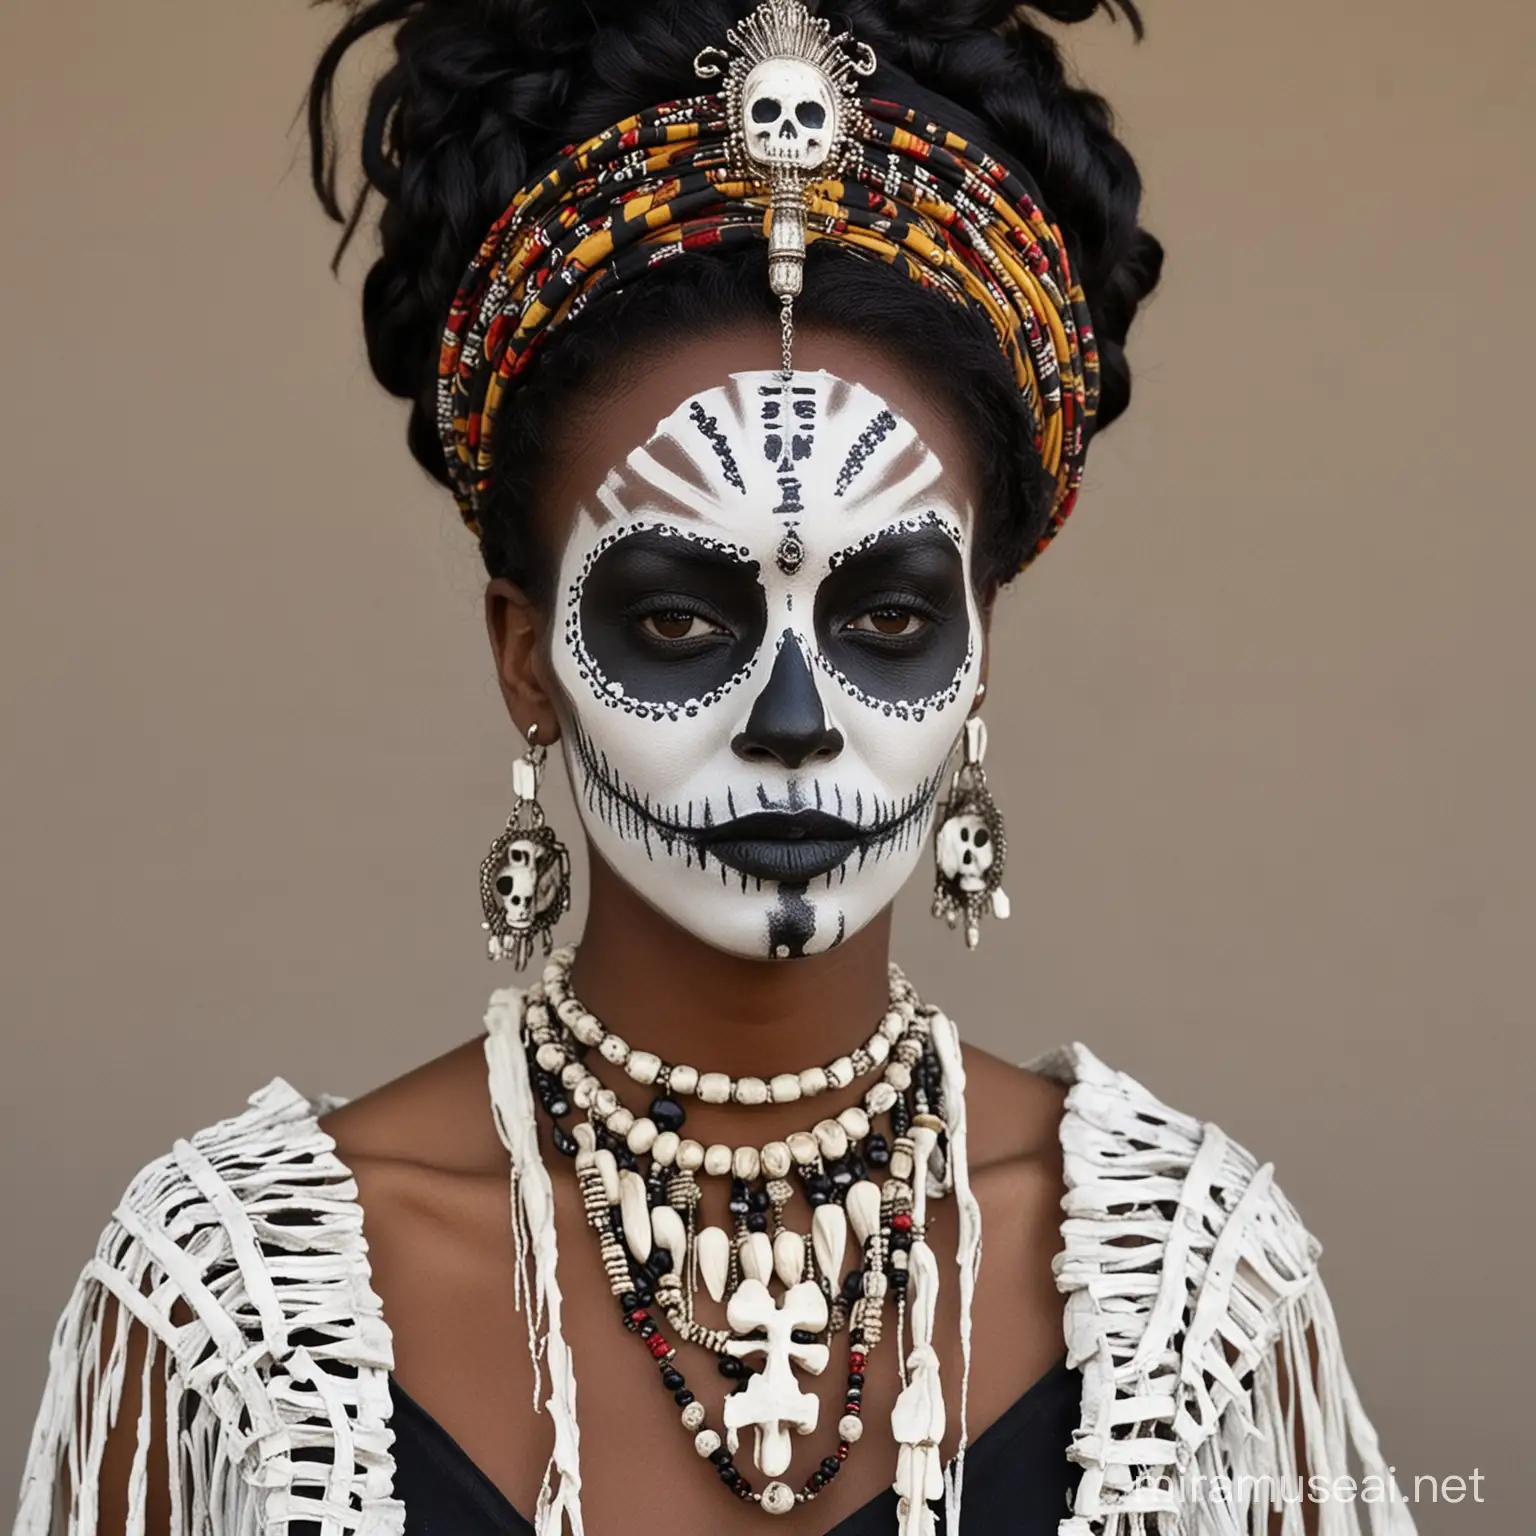 Creole Voodoo Queen with Bone Necklace and Skeleton Face Paint